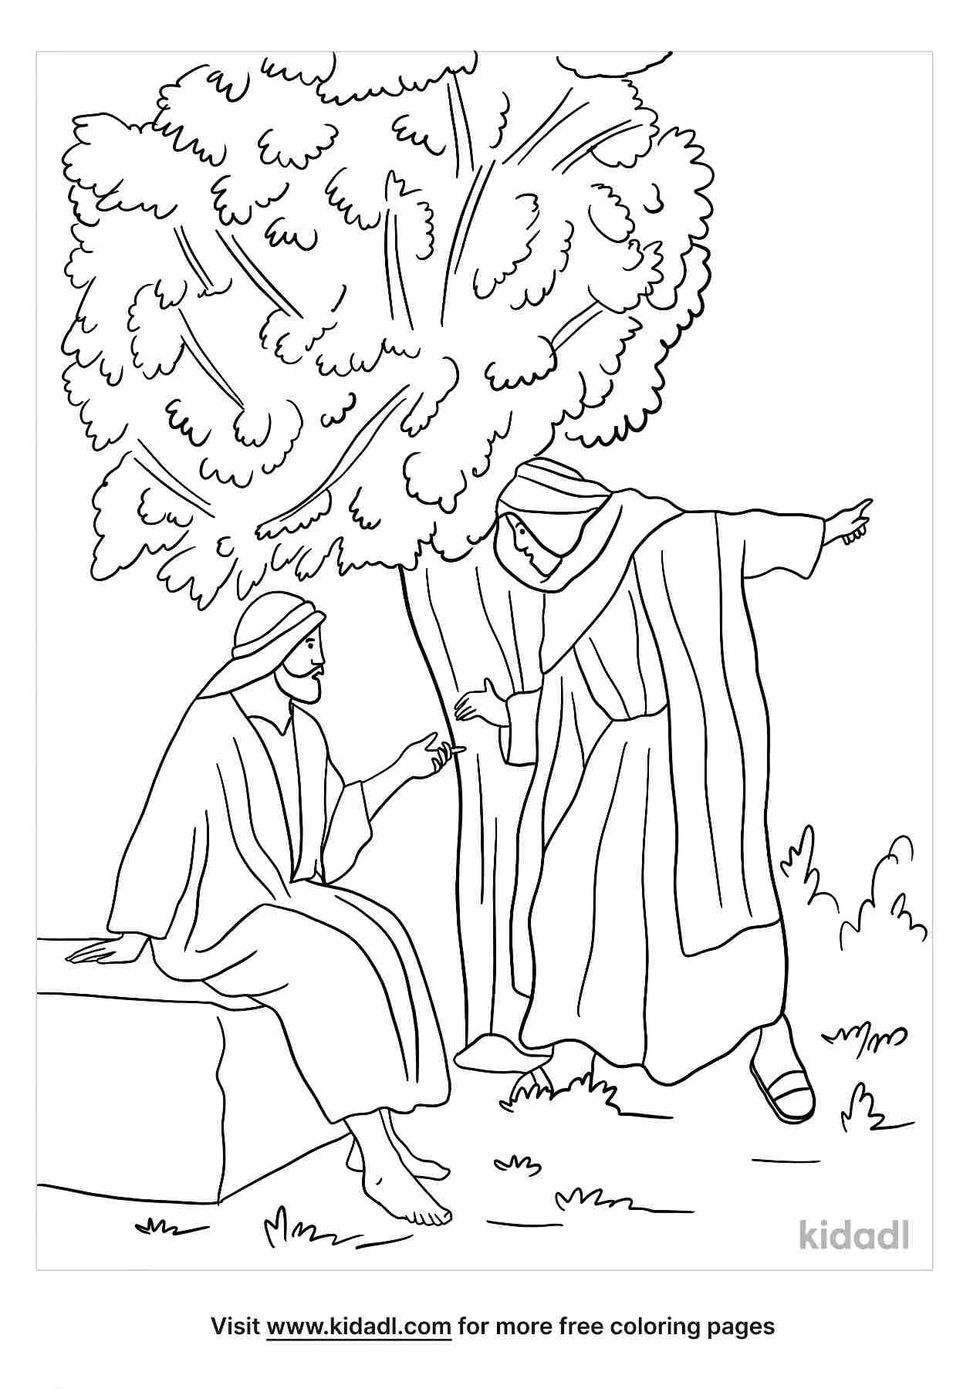 Nathaniel And The Fig Tree | Kidadl